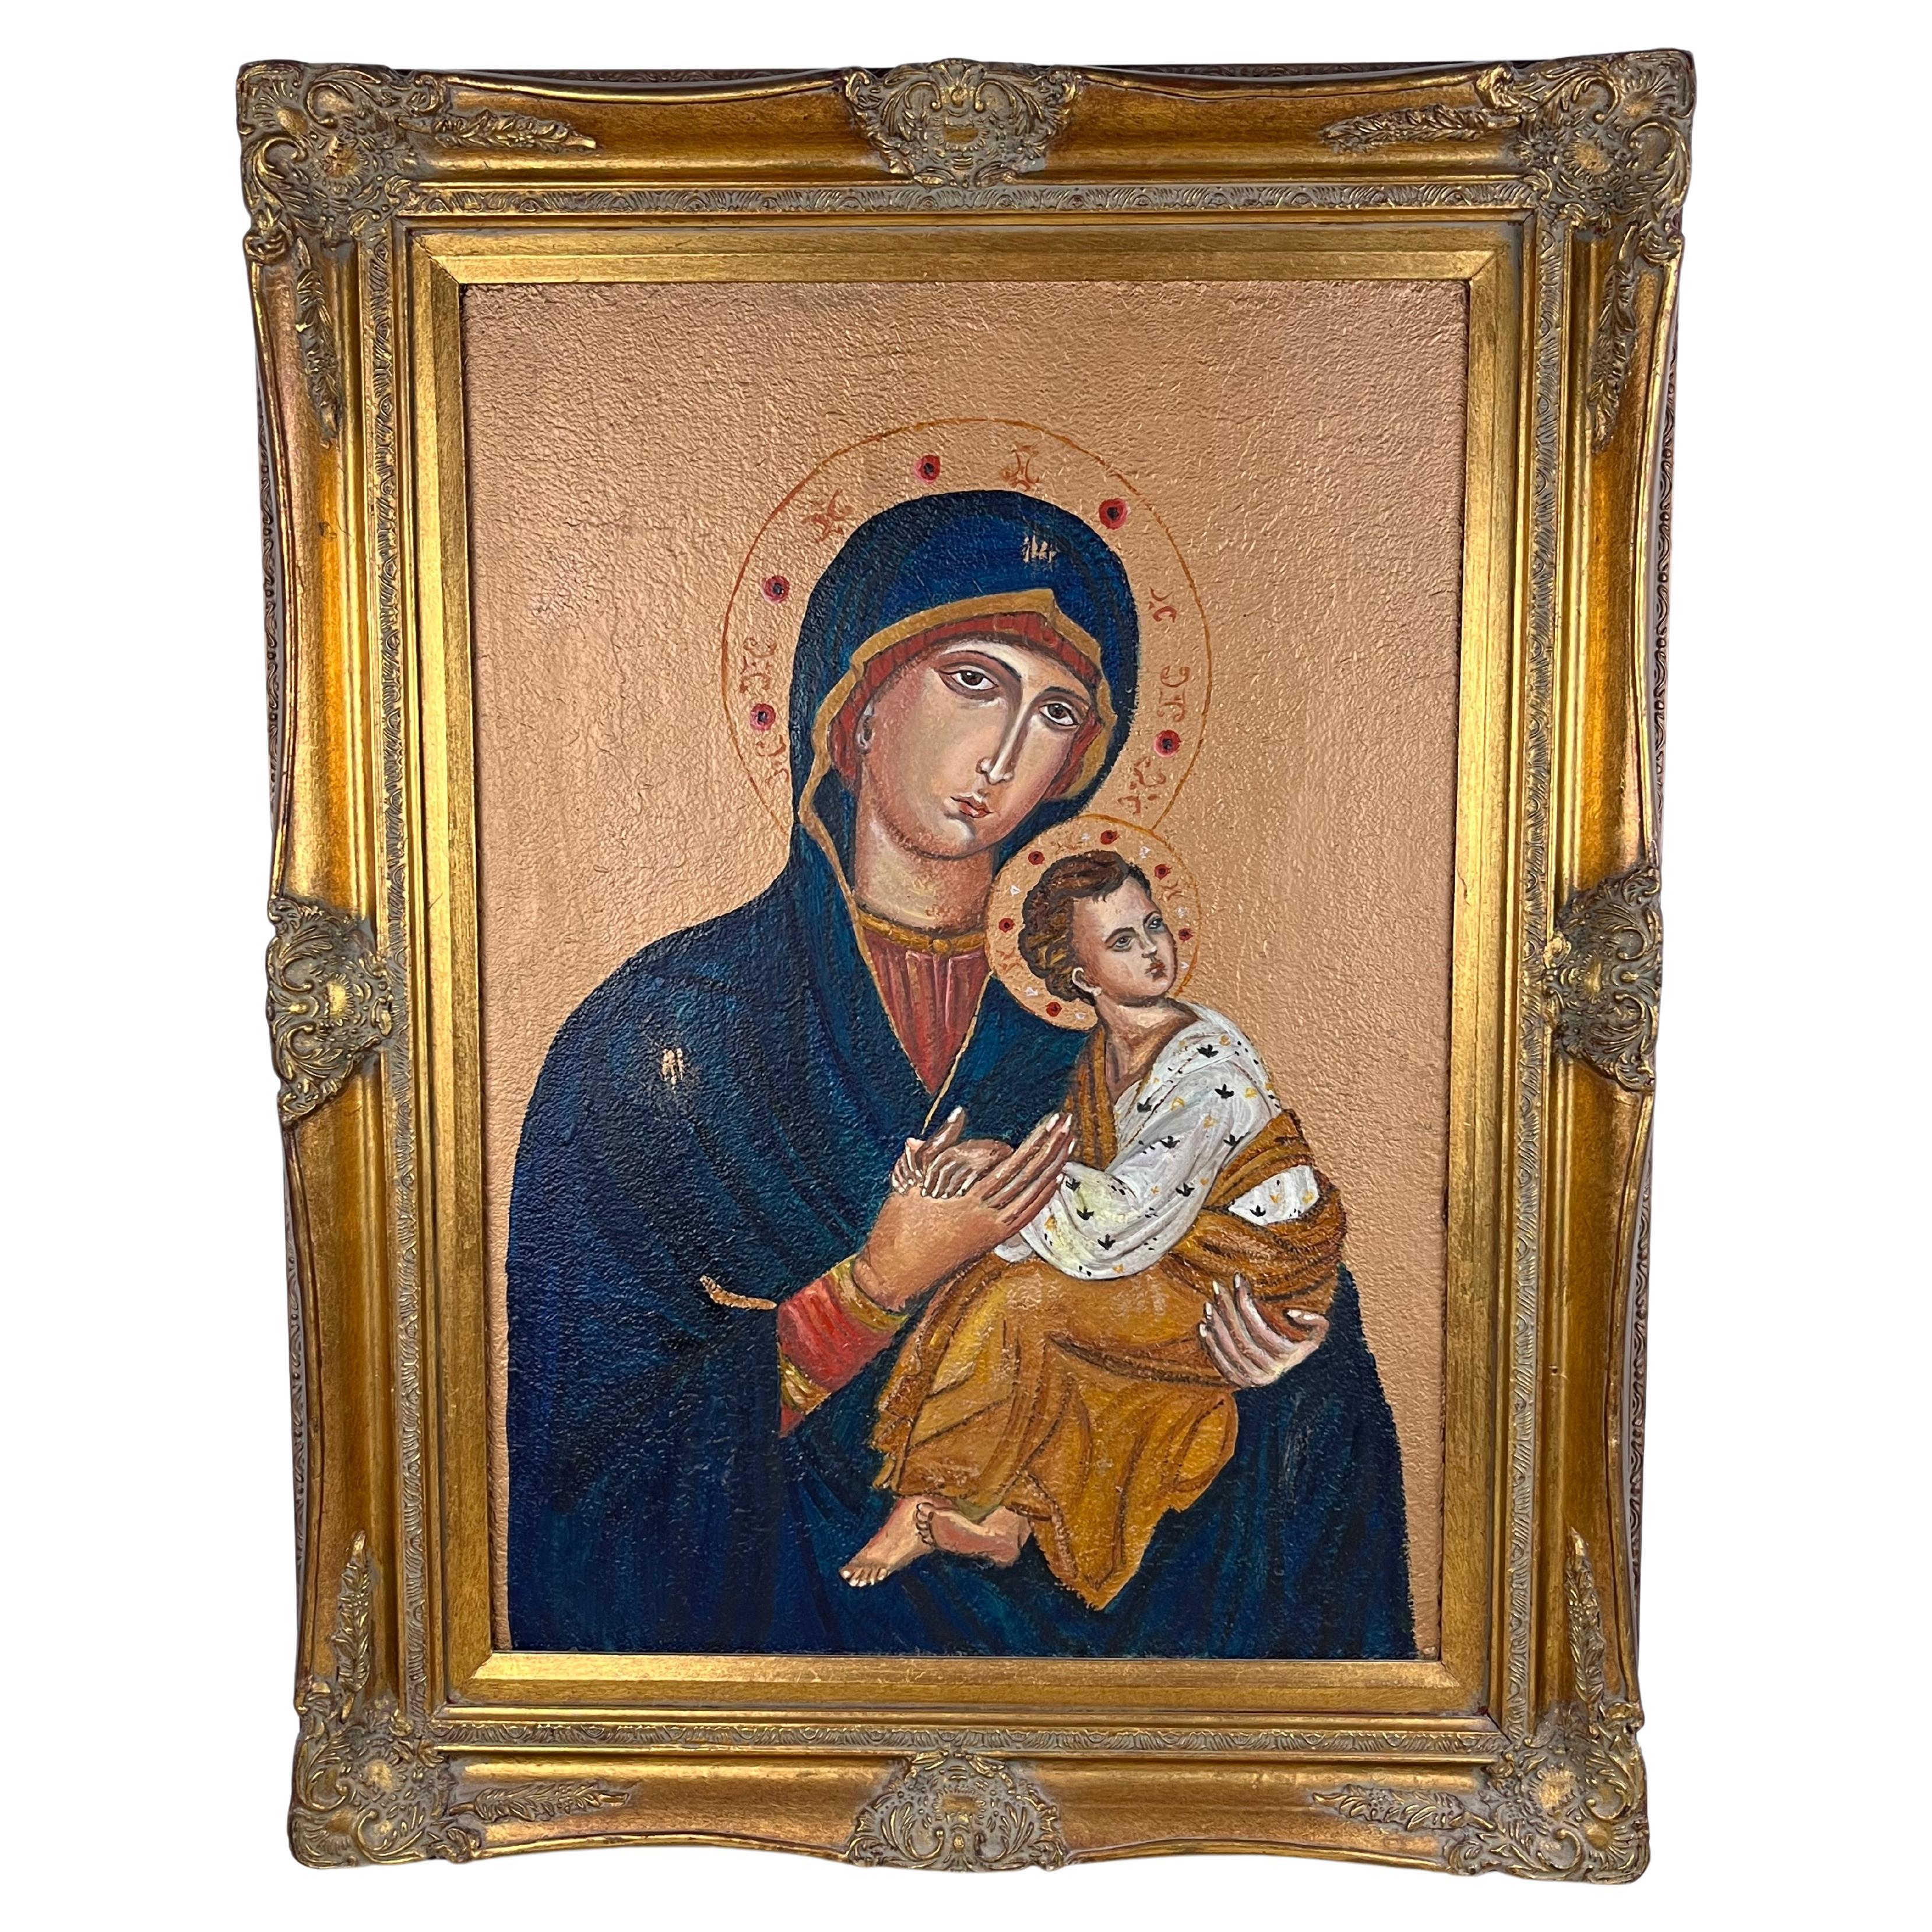 Our Lady of Perpetual Help Painting Oil Painting On Sackcloth, 1980s, 89 x 68